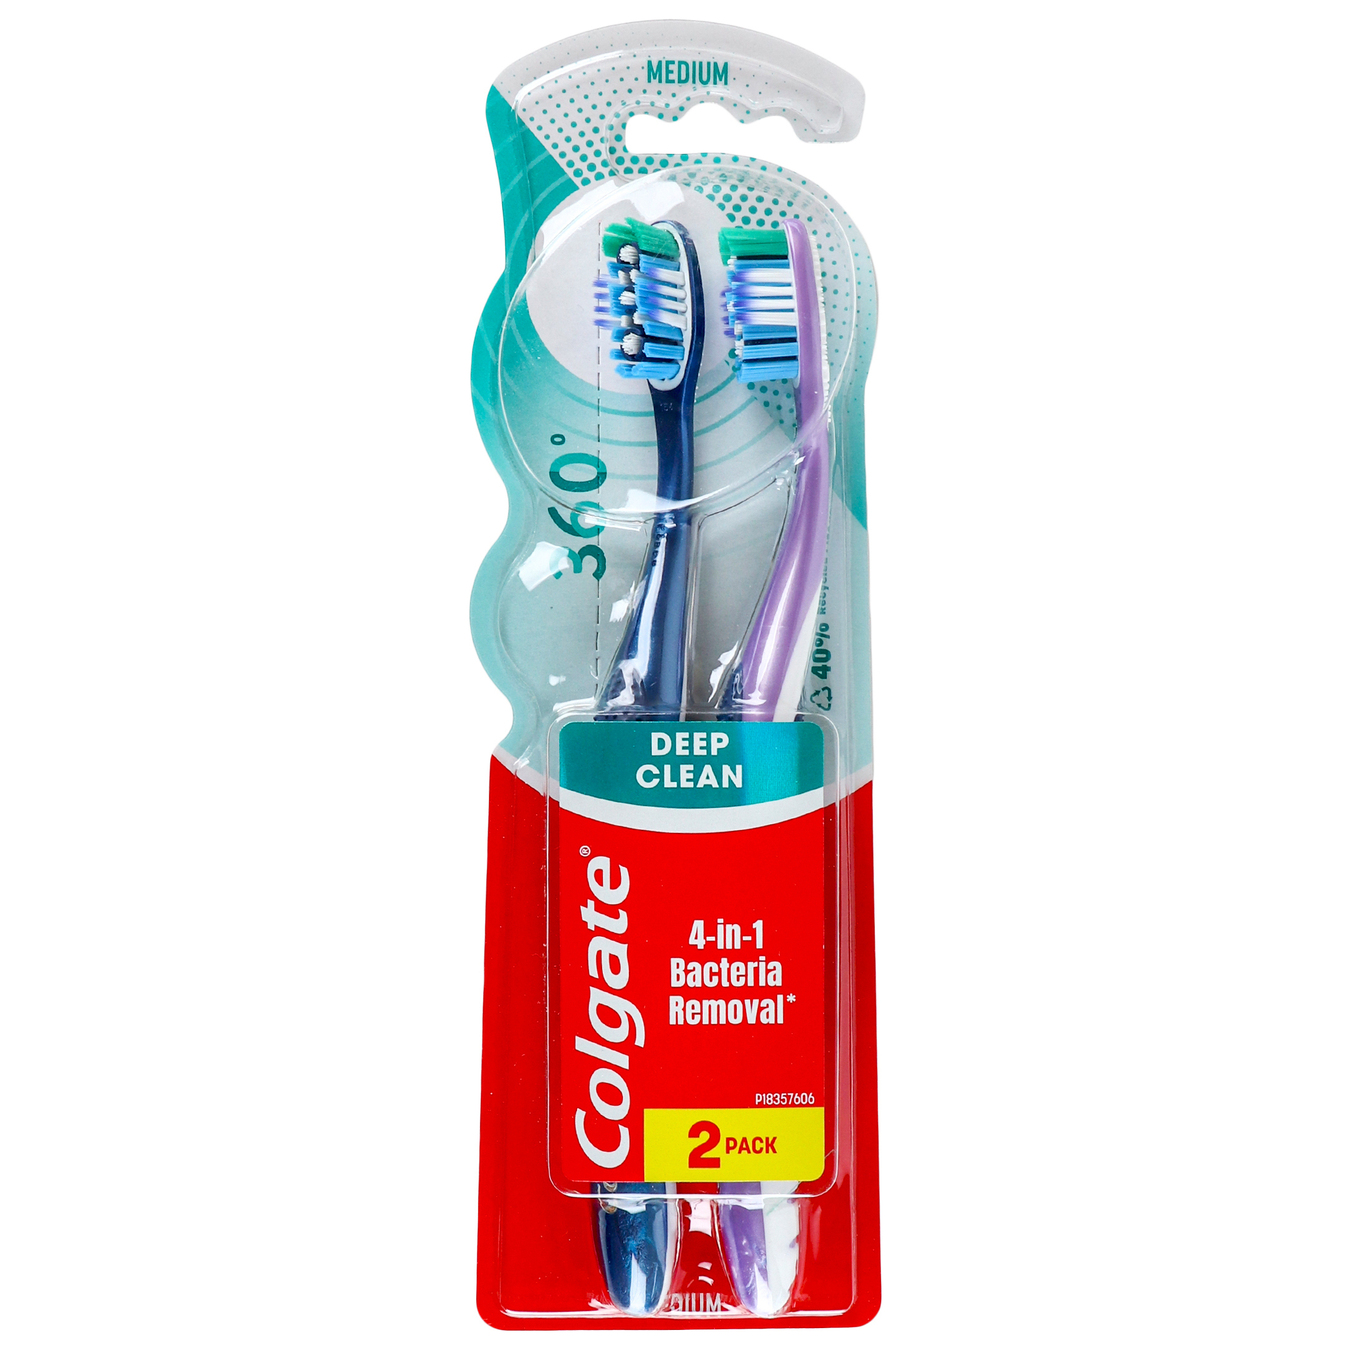 Toothbrush Colgate 360 super clean of the entire oral cavity of medium hardness